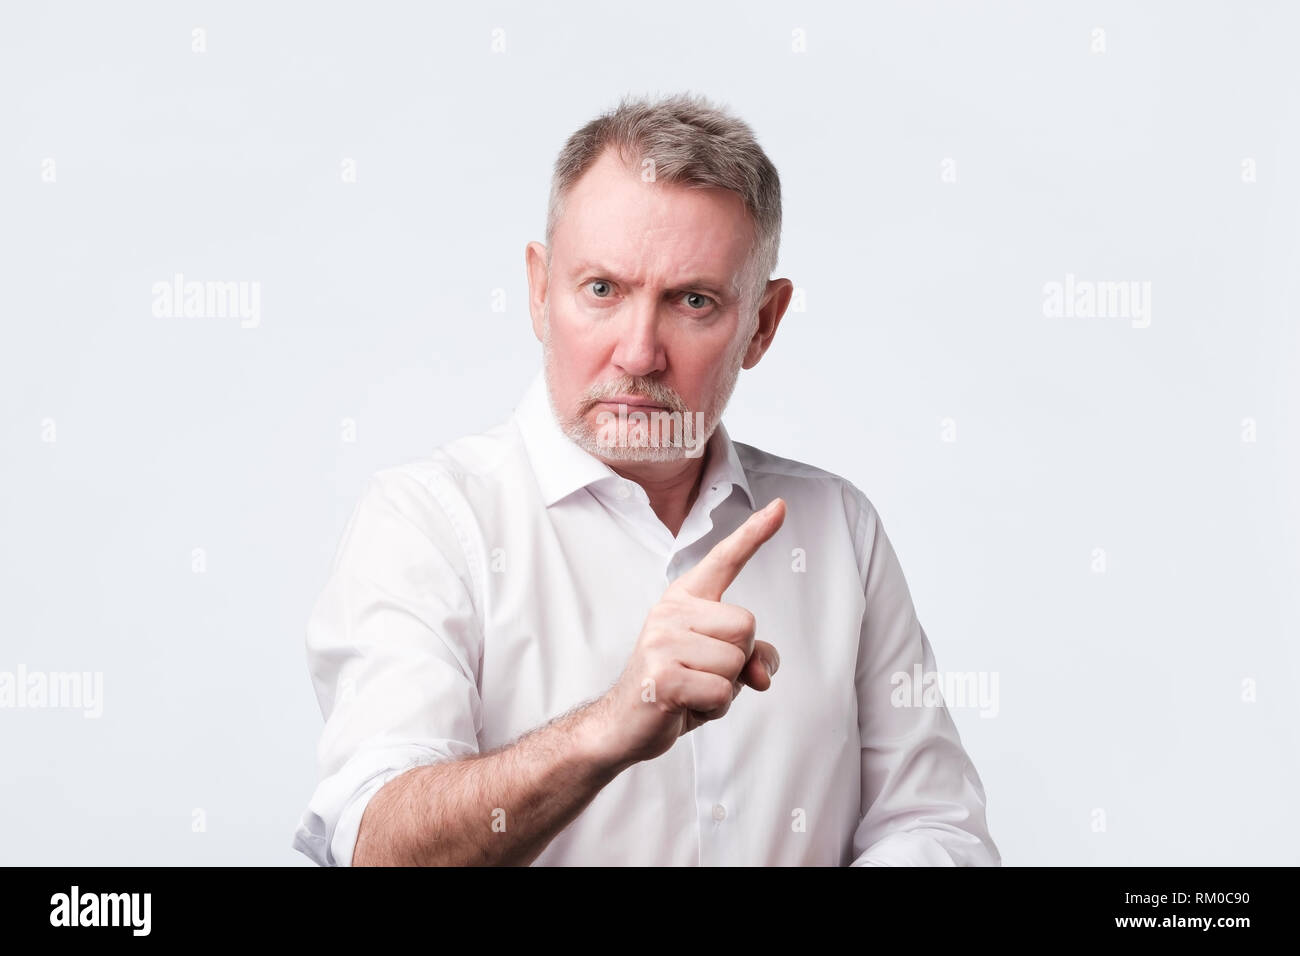 Strict senior man showing index fingers up, giving advice Stock Photo